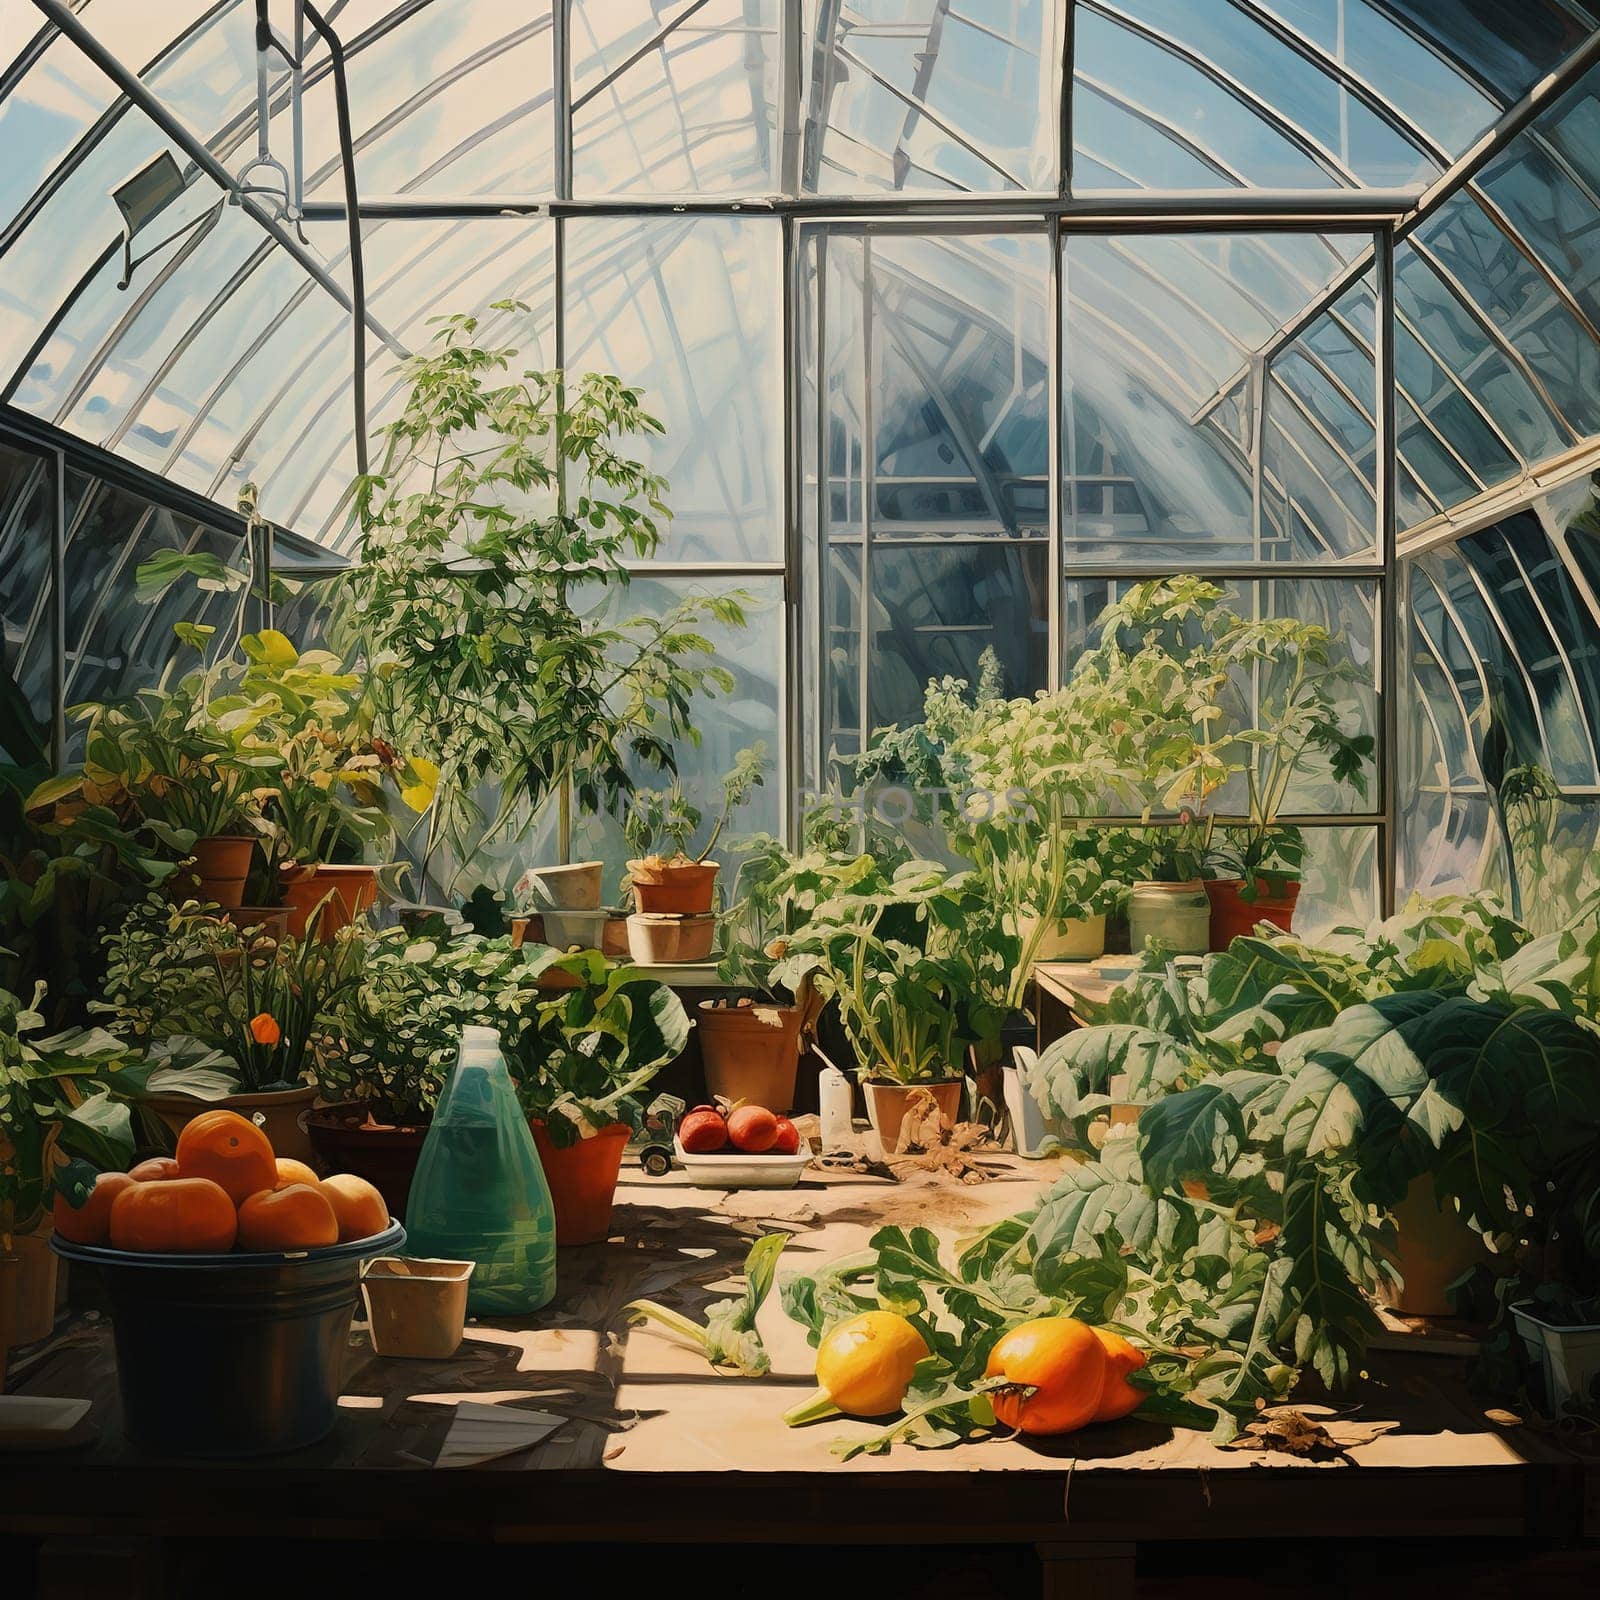 Greenhouse with kind of vegetable and gardening equipment, agricultural concept by Kadula